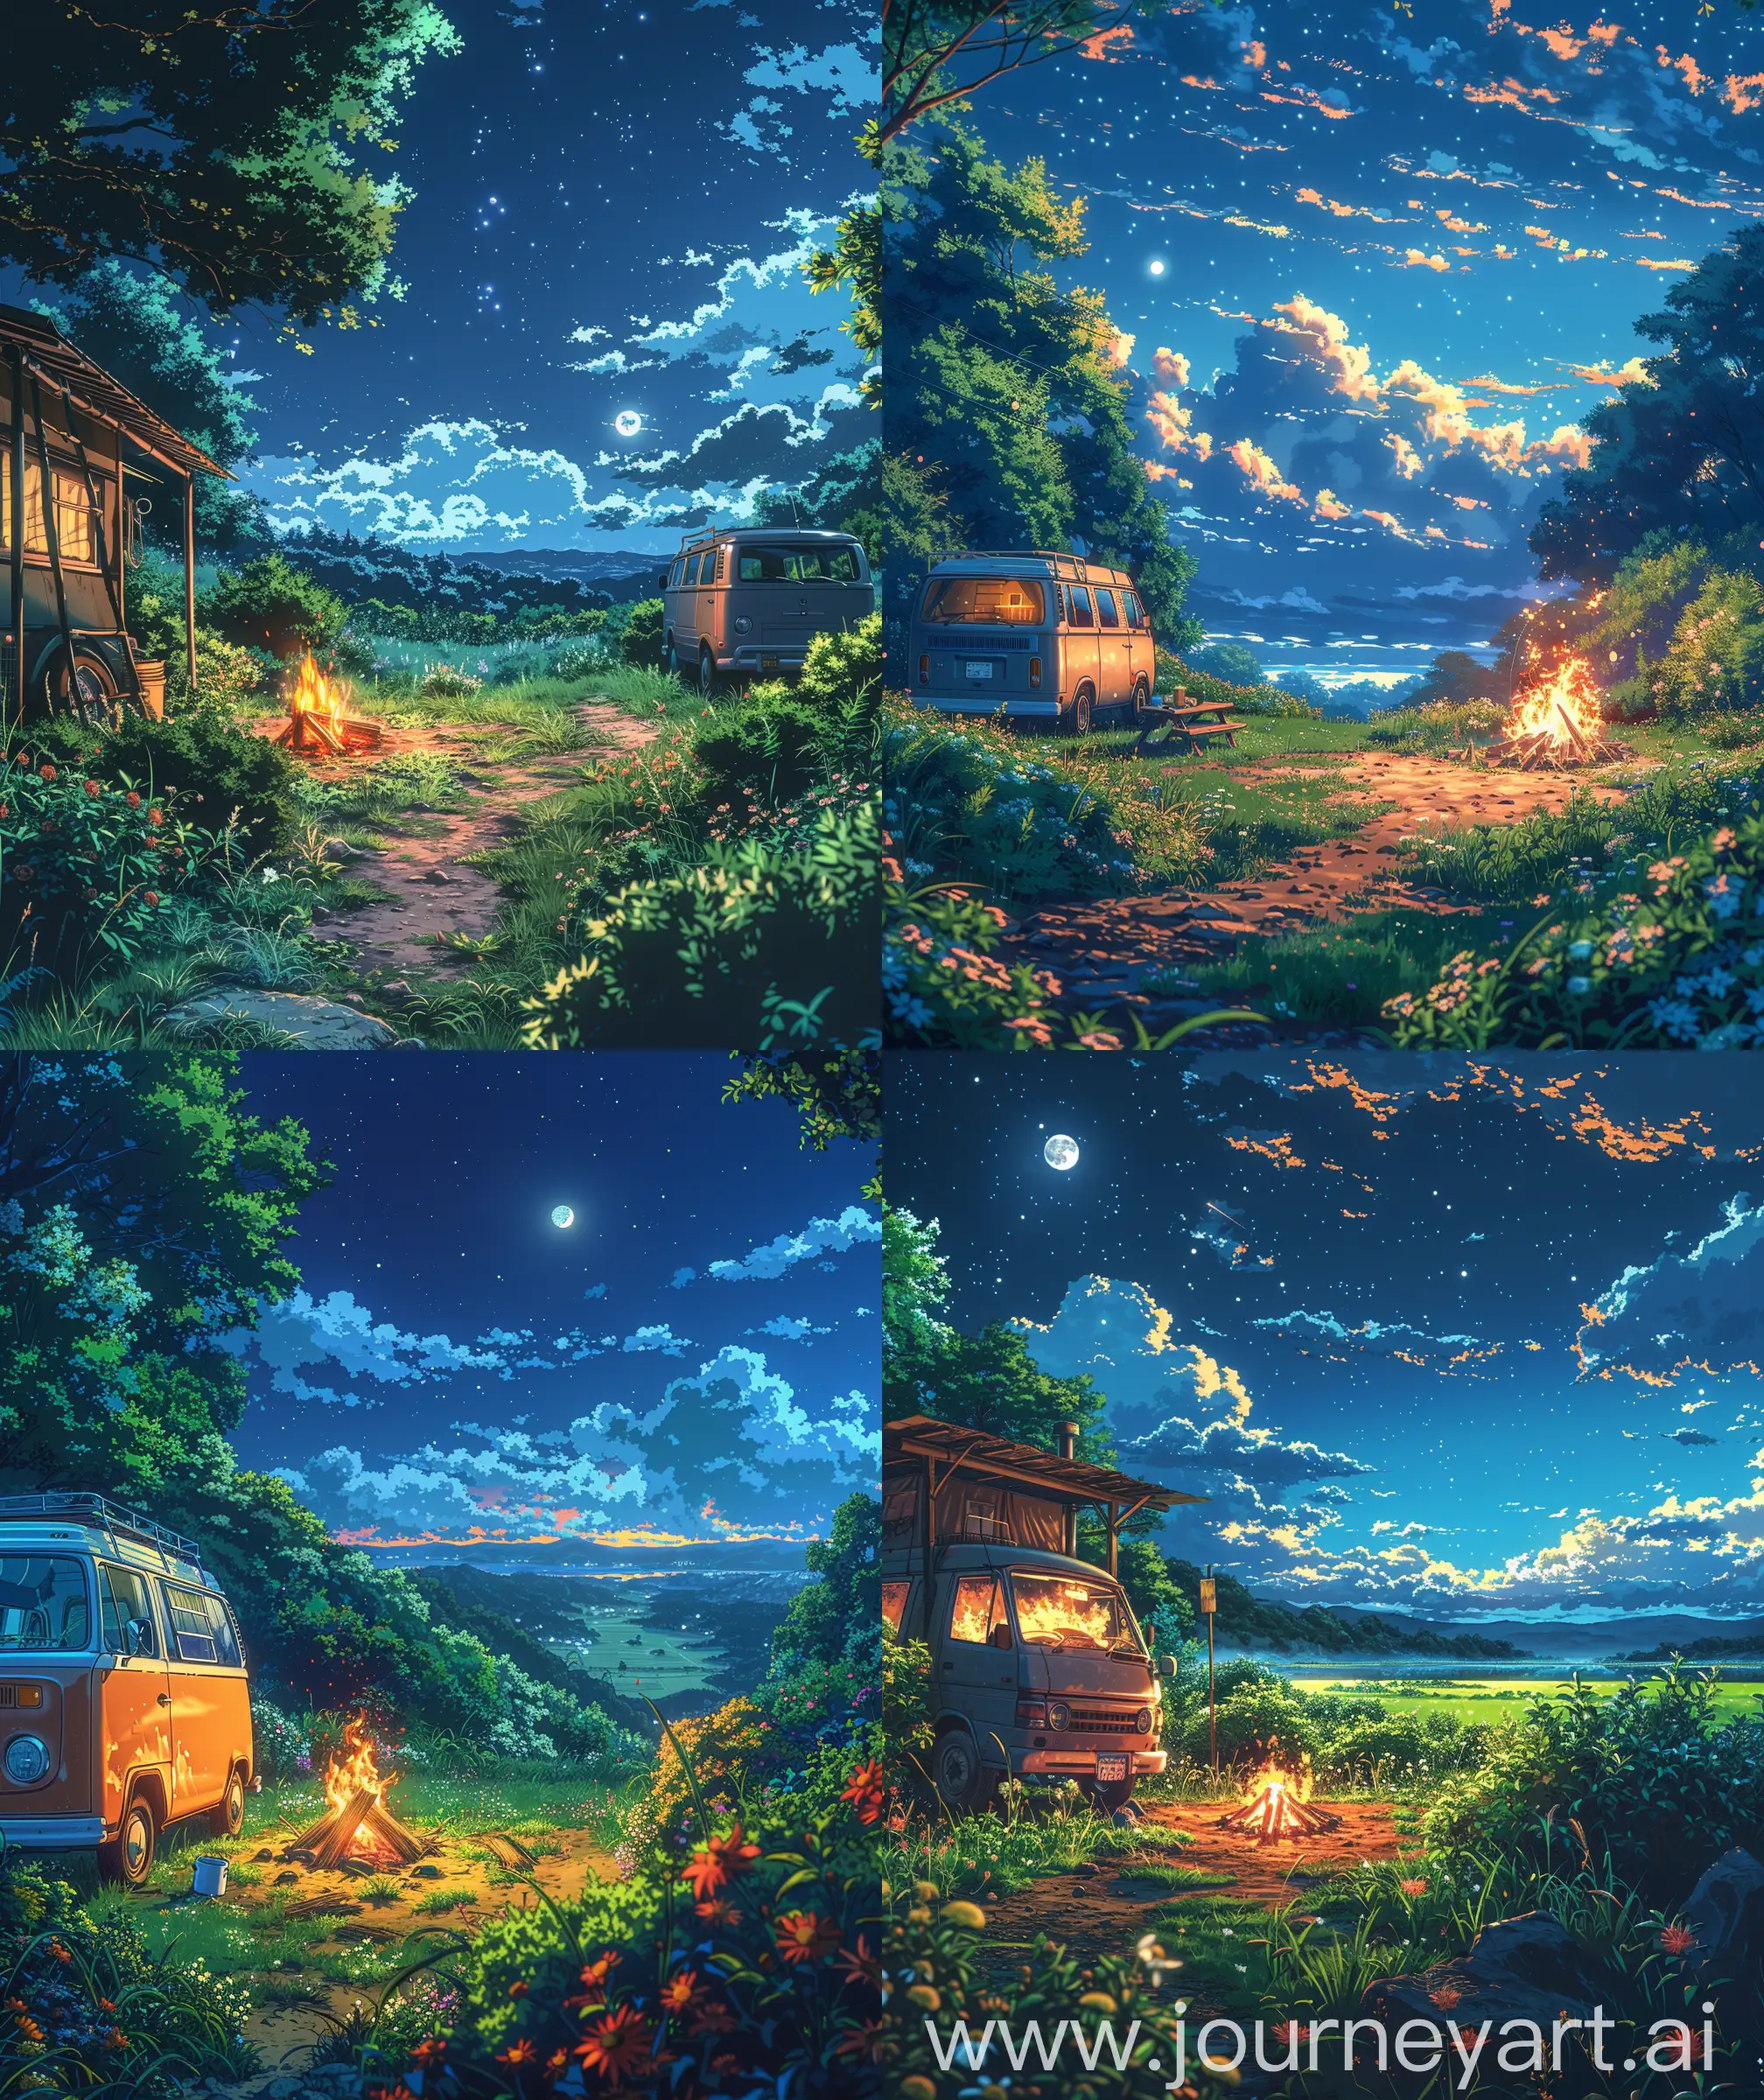 Anime scenary, illustration, mokoto shinkai and Ghibli style, front facade view of camp, bonfire, van beside, grass, flowers, clear night sky, moonlight view, close up view, bushes, vibrant color, beautiful sky, illustration, anime scenary, High quality, sharp details, no hyperrealistic --ar 27:32 --s 400